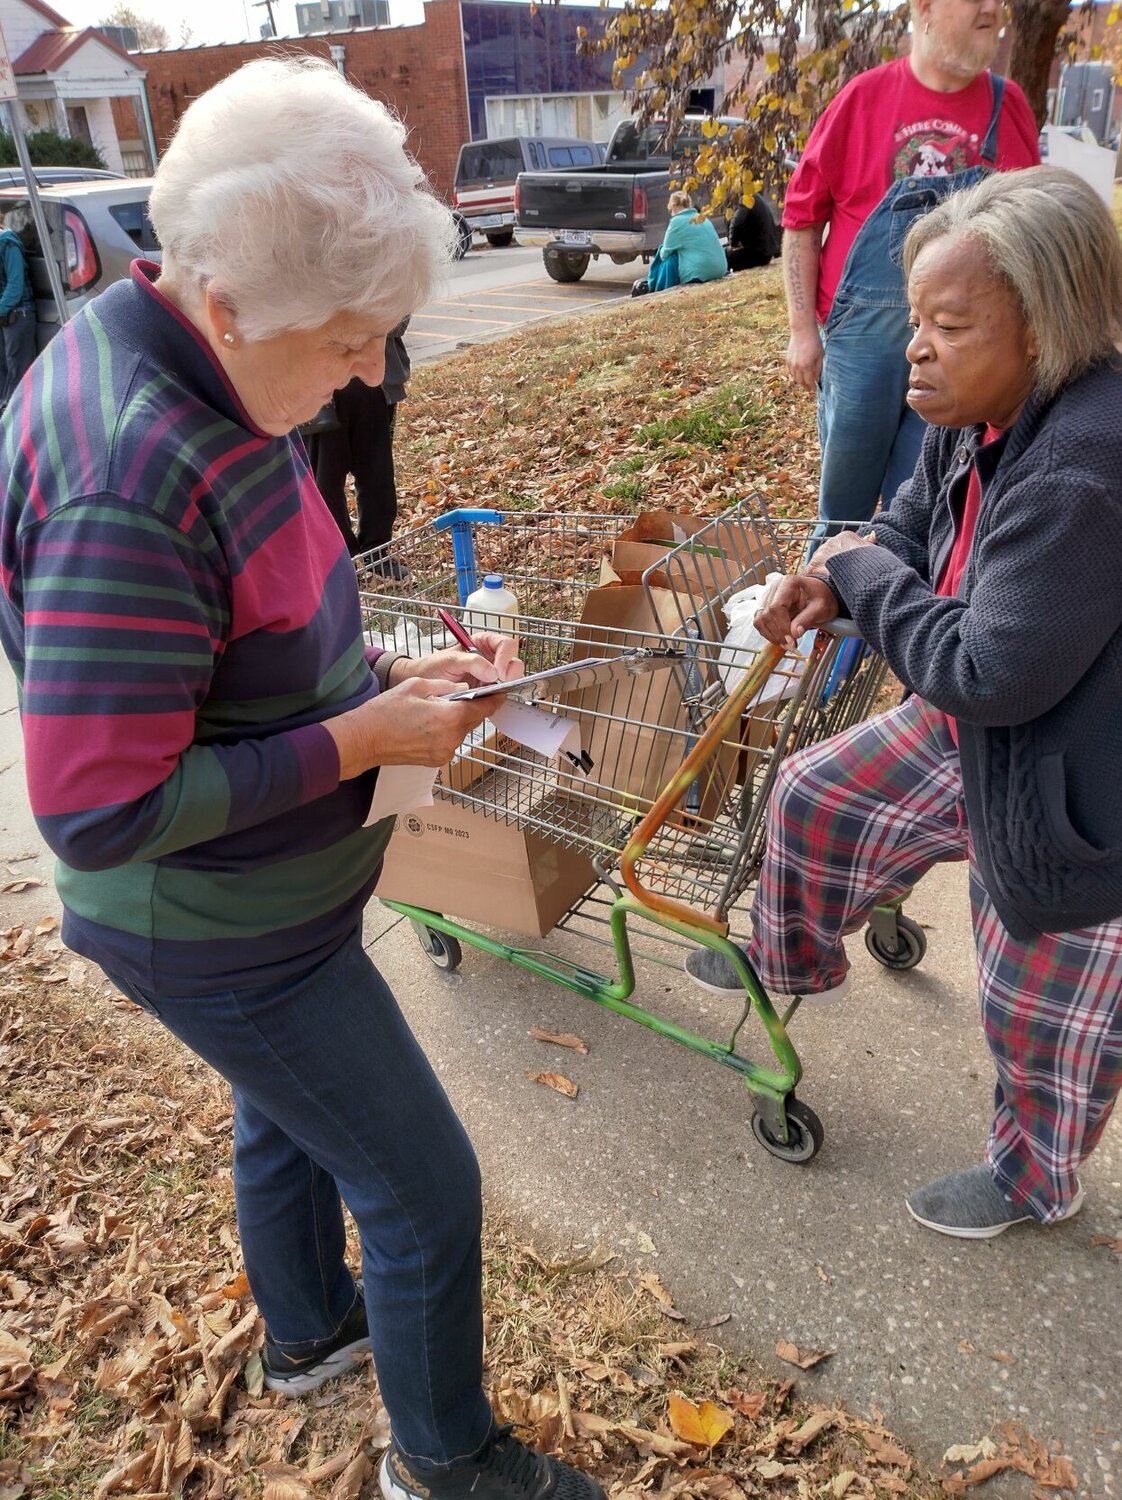 Volunteers distribute food items at a previous Christmas Store event. This year's Christmas Store will be hosted in mid-December at the Bethlehem Lutheran Church.